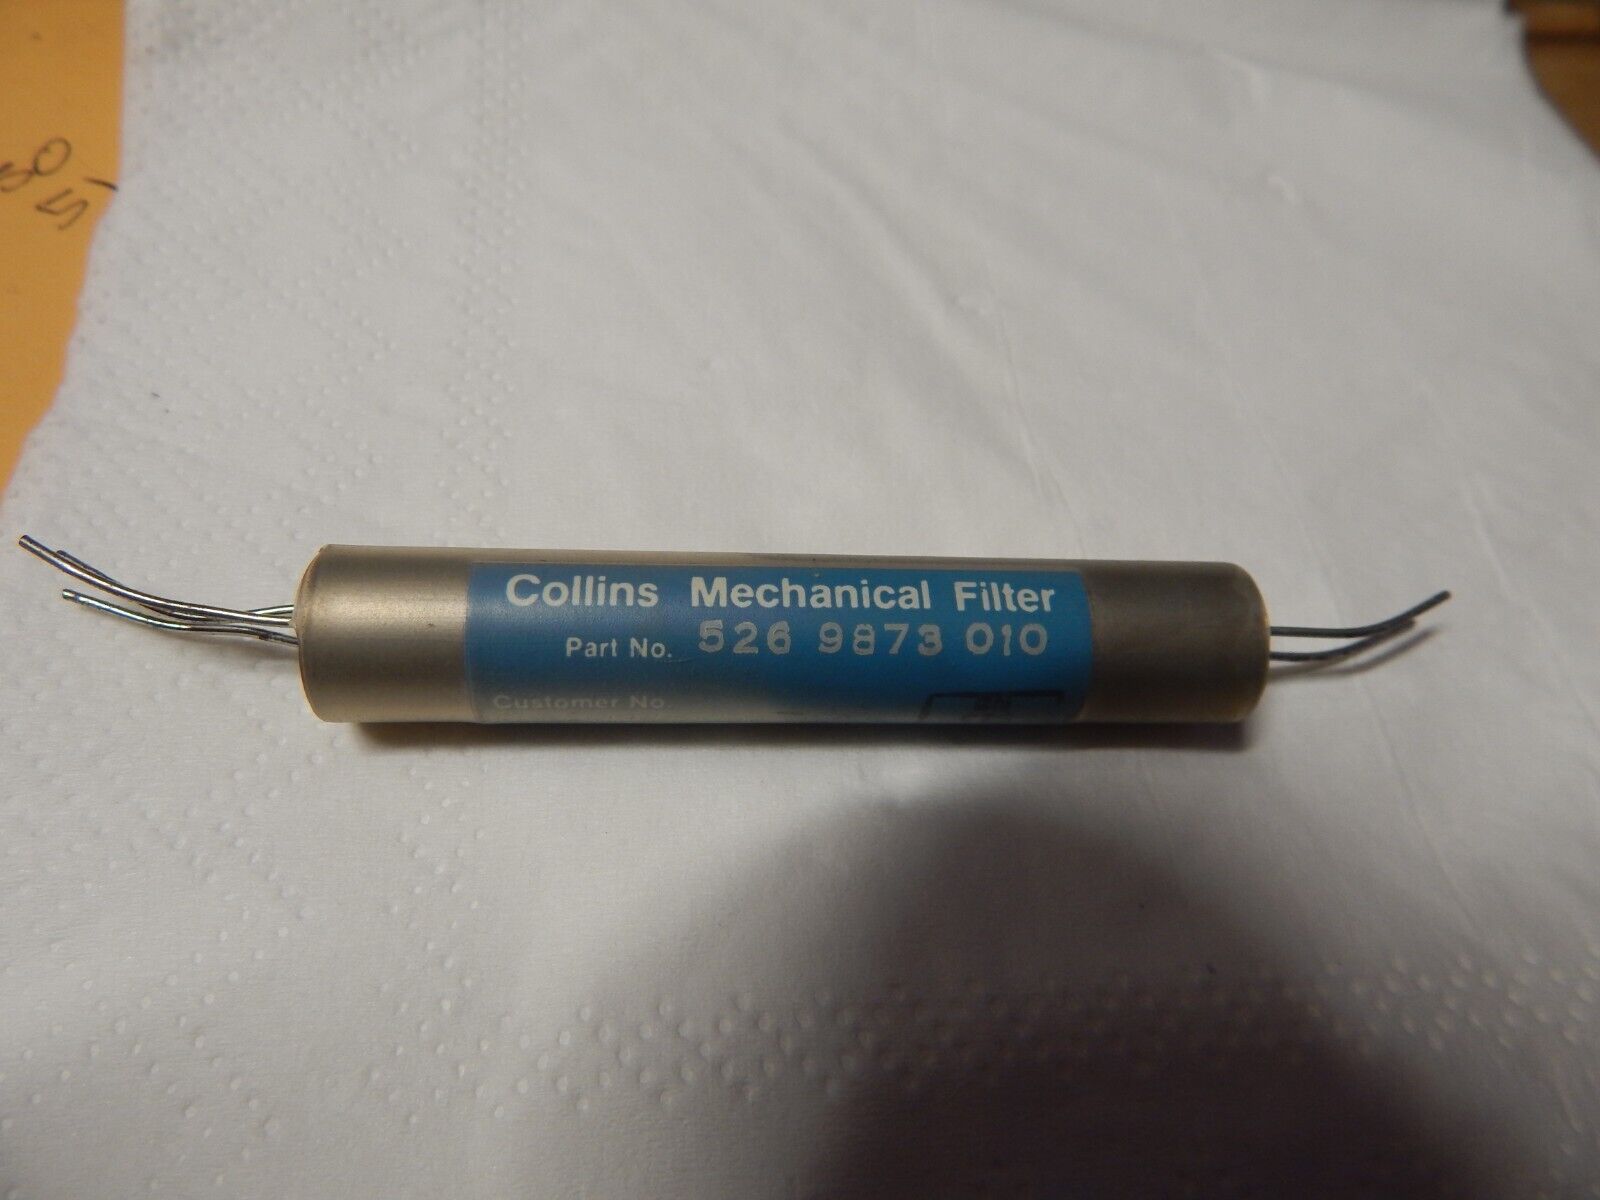 Rockwell International Collins Mechanical Filter 526-9873 010 (one Of Three)